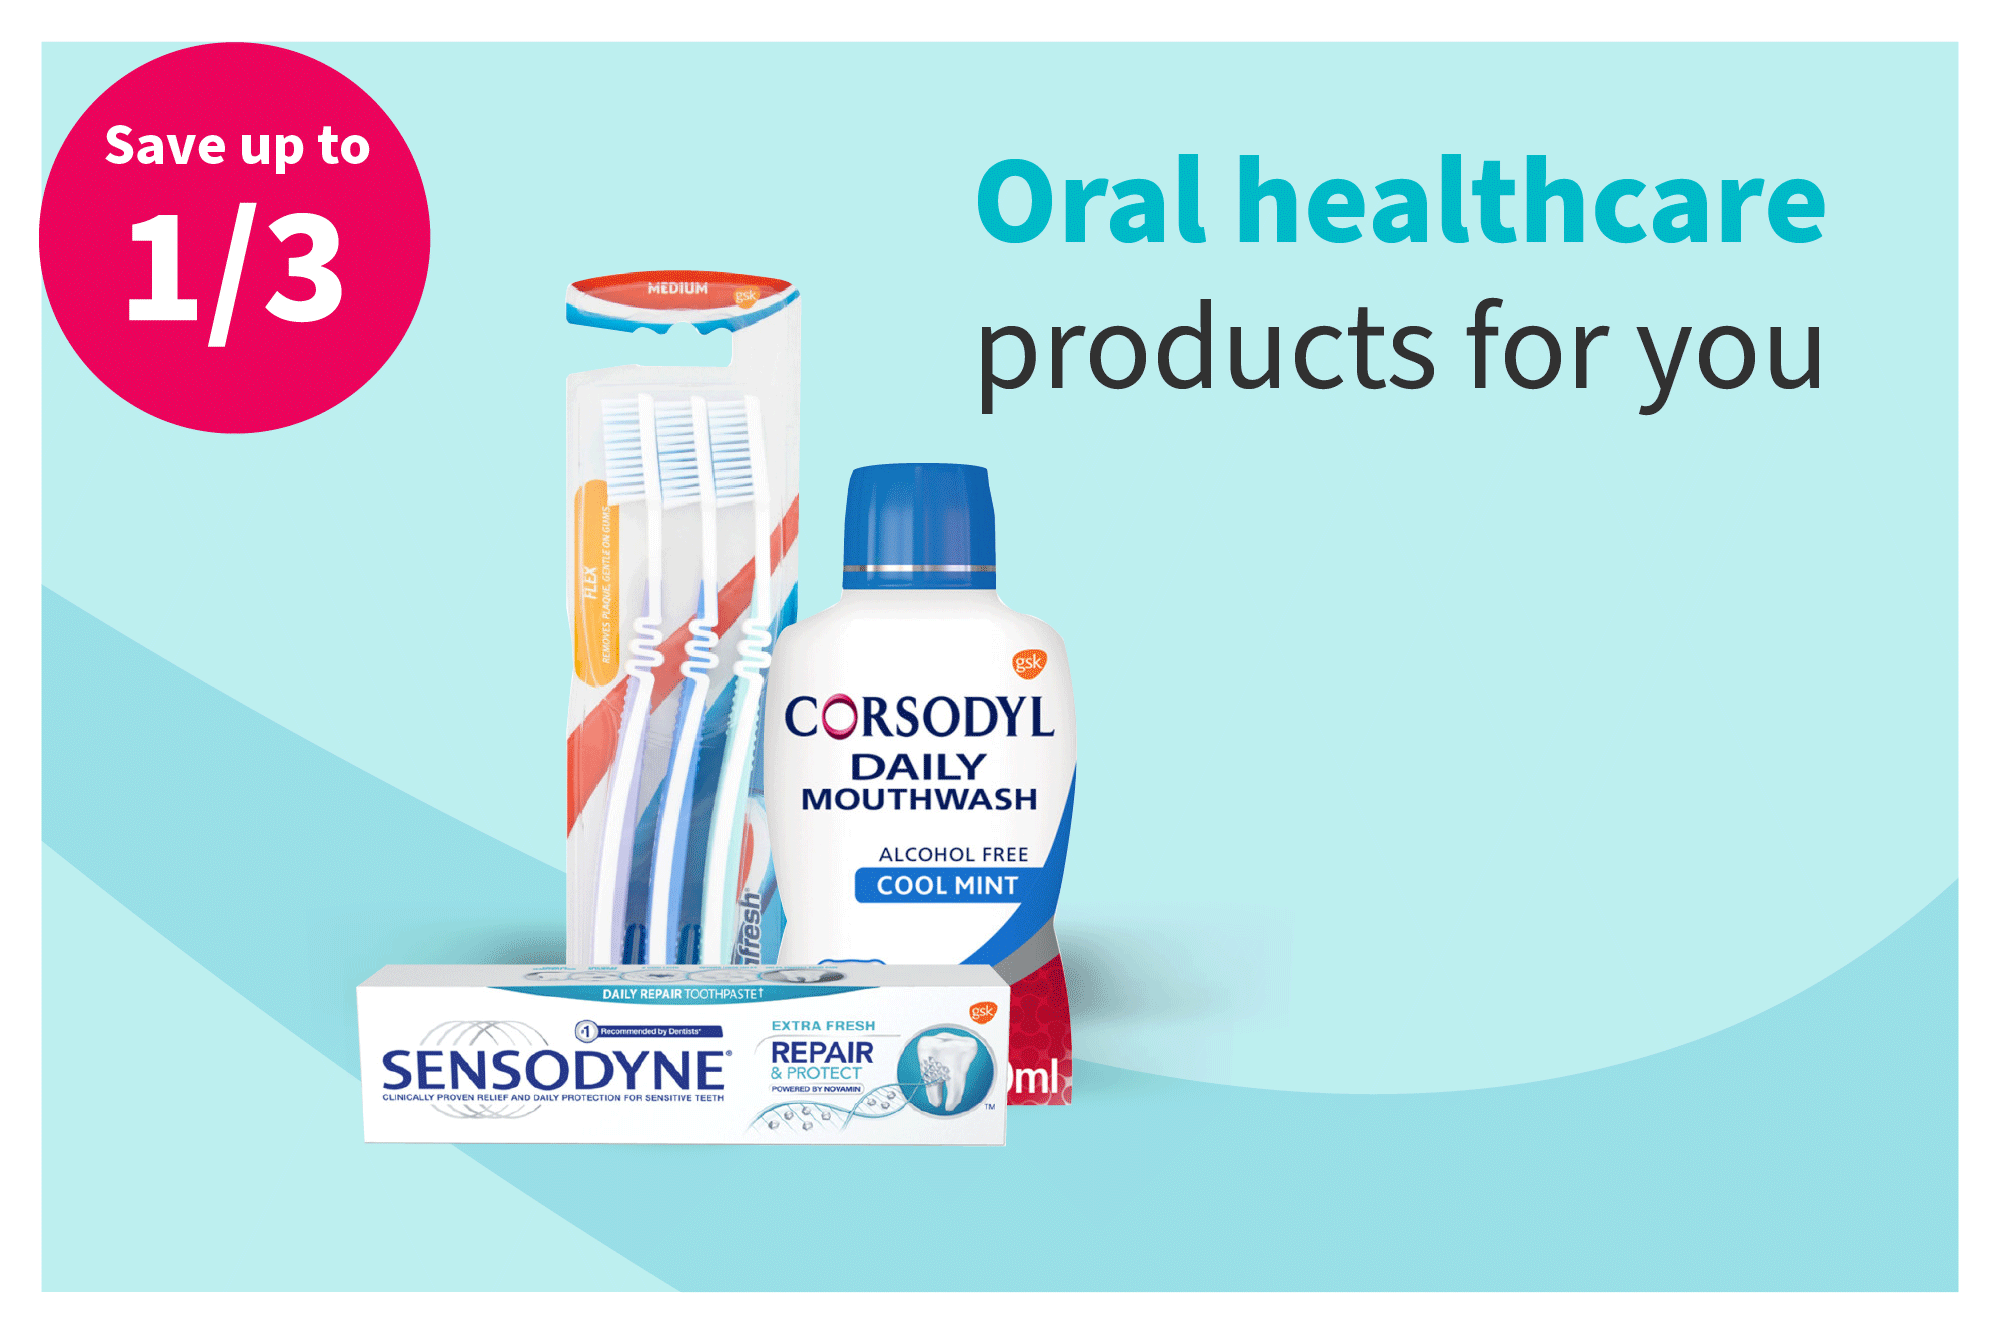 Save up to 1/3 on Dental Essentials			